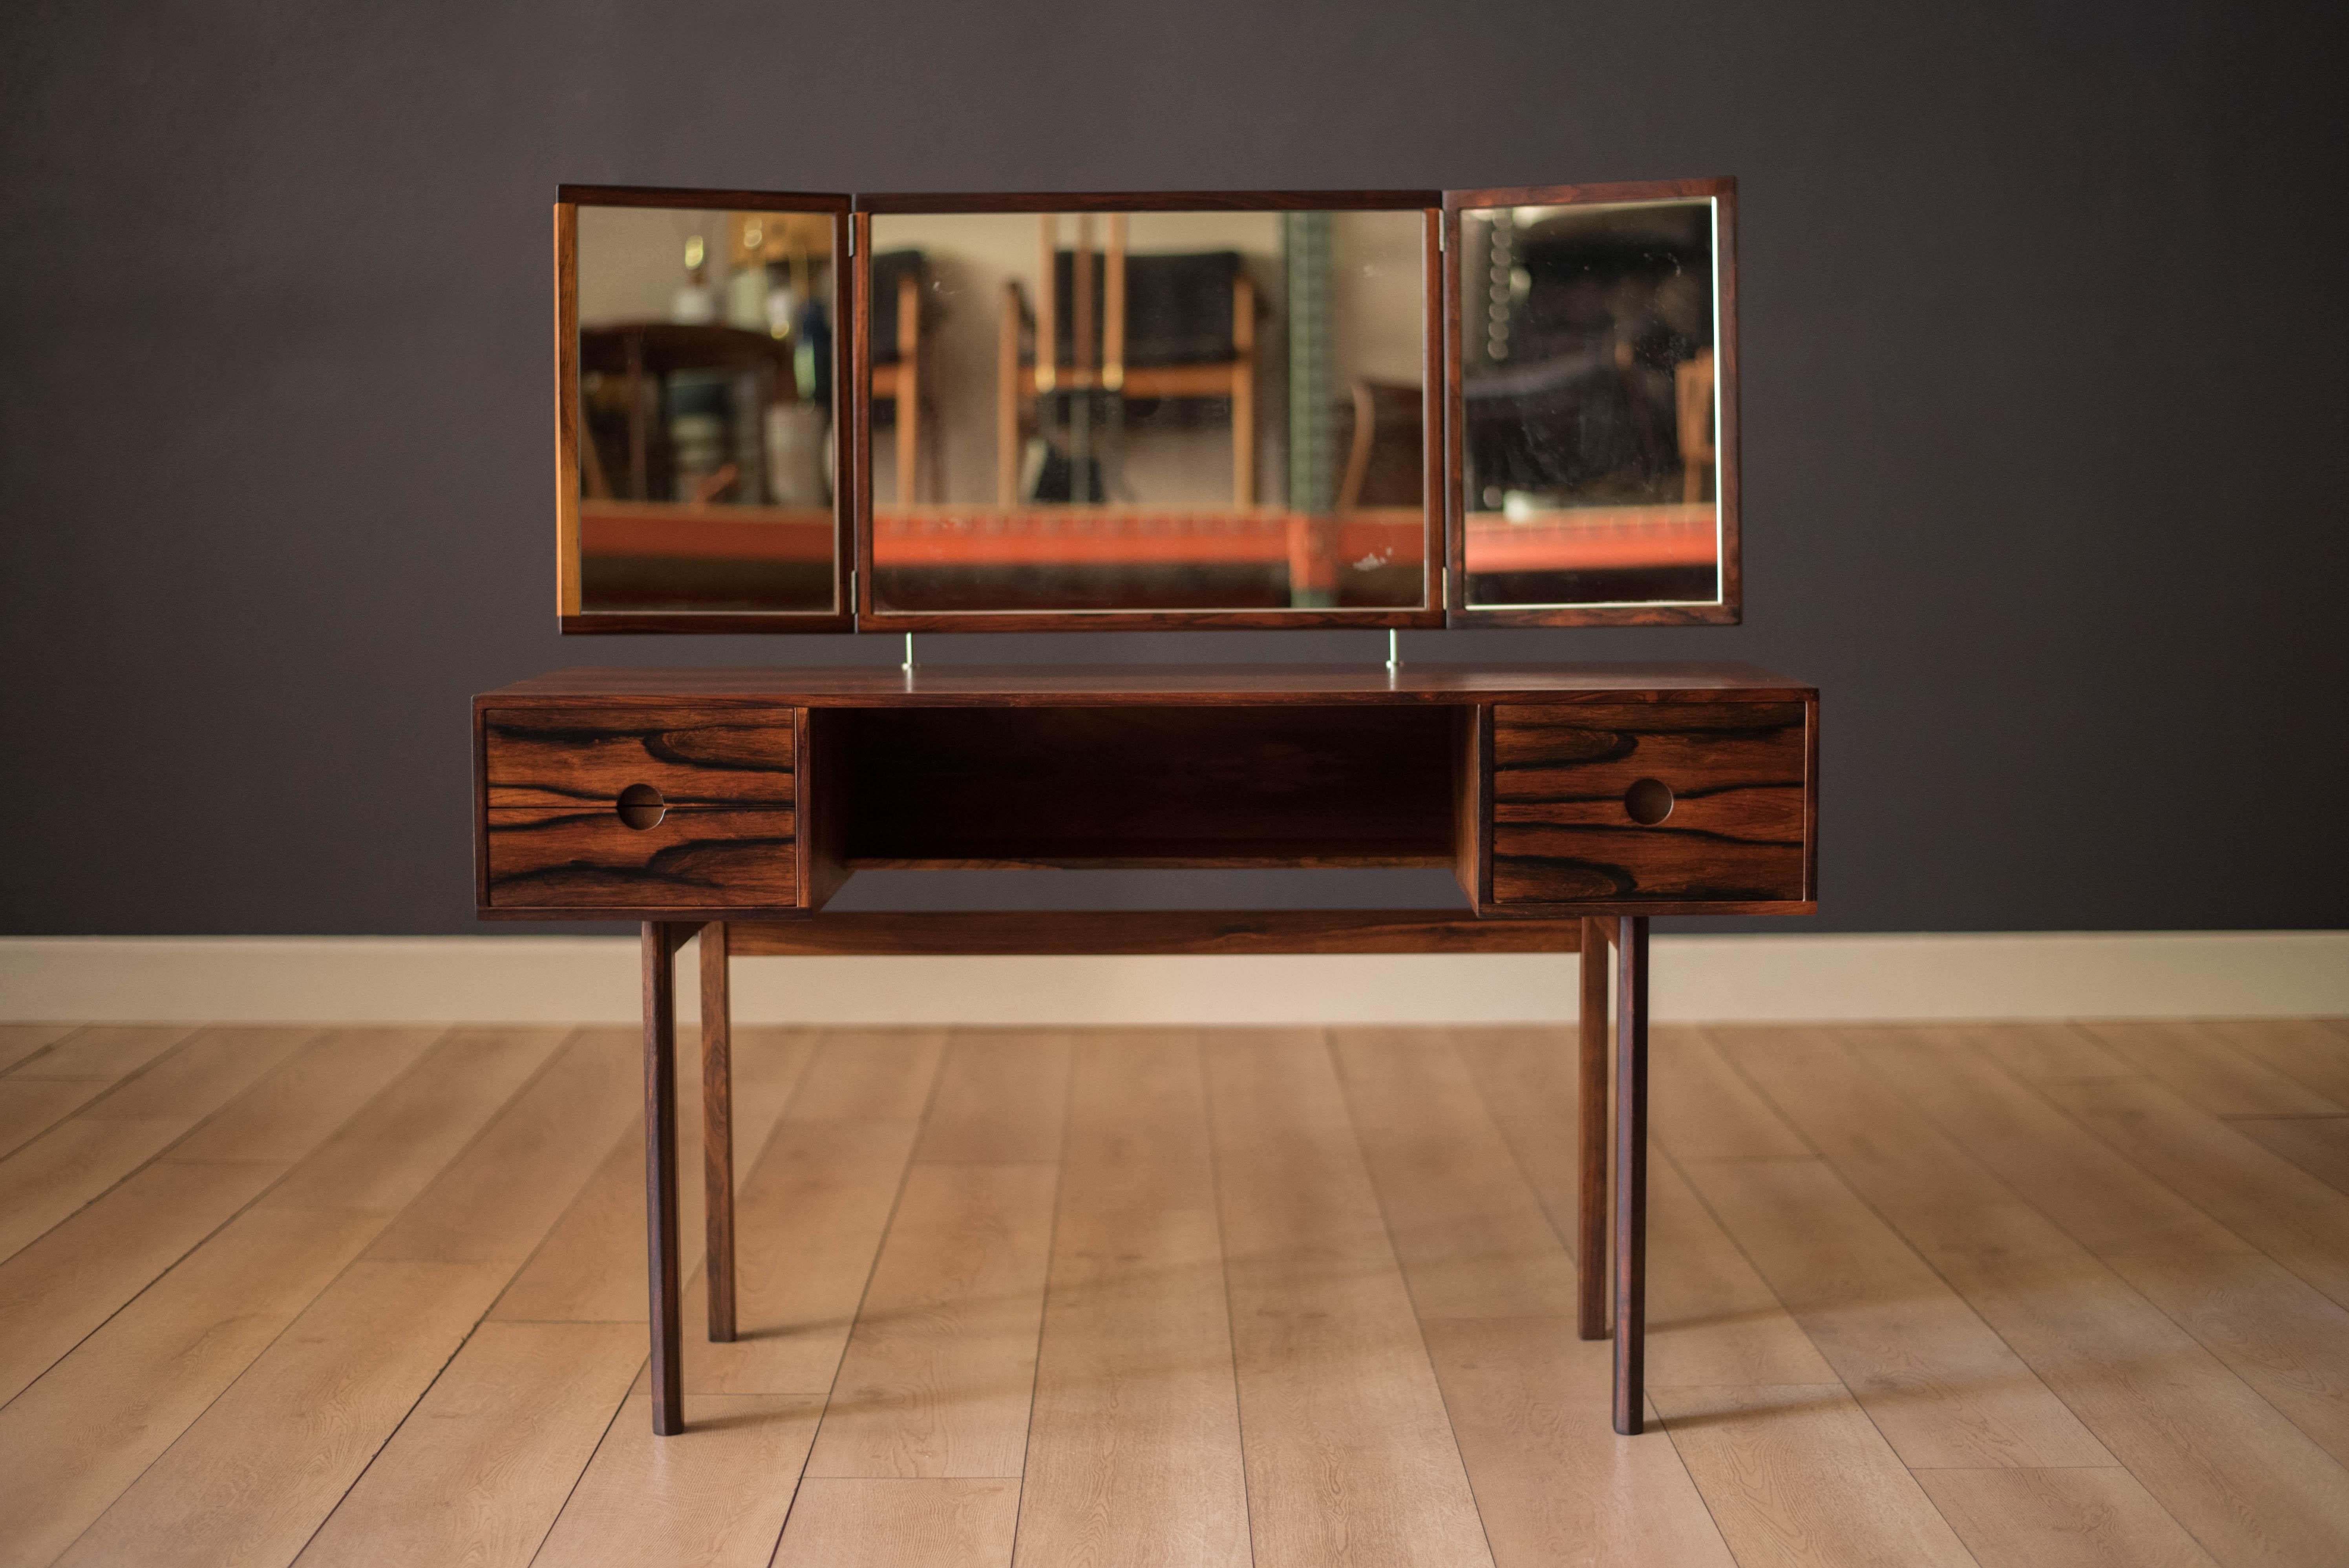 Mid-Century Modern vanity dressing table in rosewood designed by Kai Kristiansen for Aksel Kjersgaard, Denmark. Features sleek circular recessed pulls that open three dovetail storage drawers and includes one center fixed shelf. The floating mirror